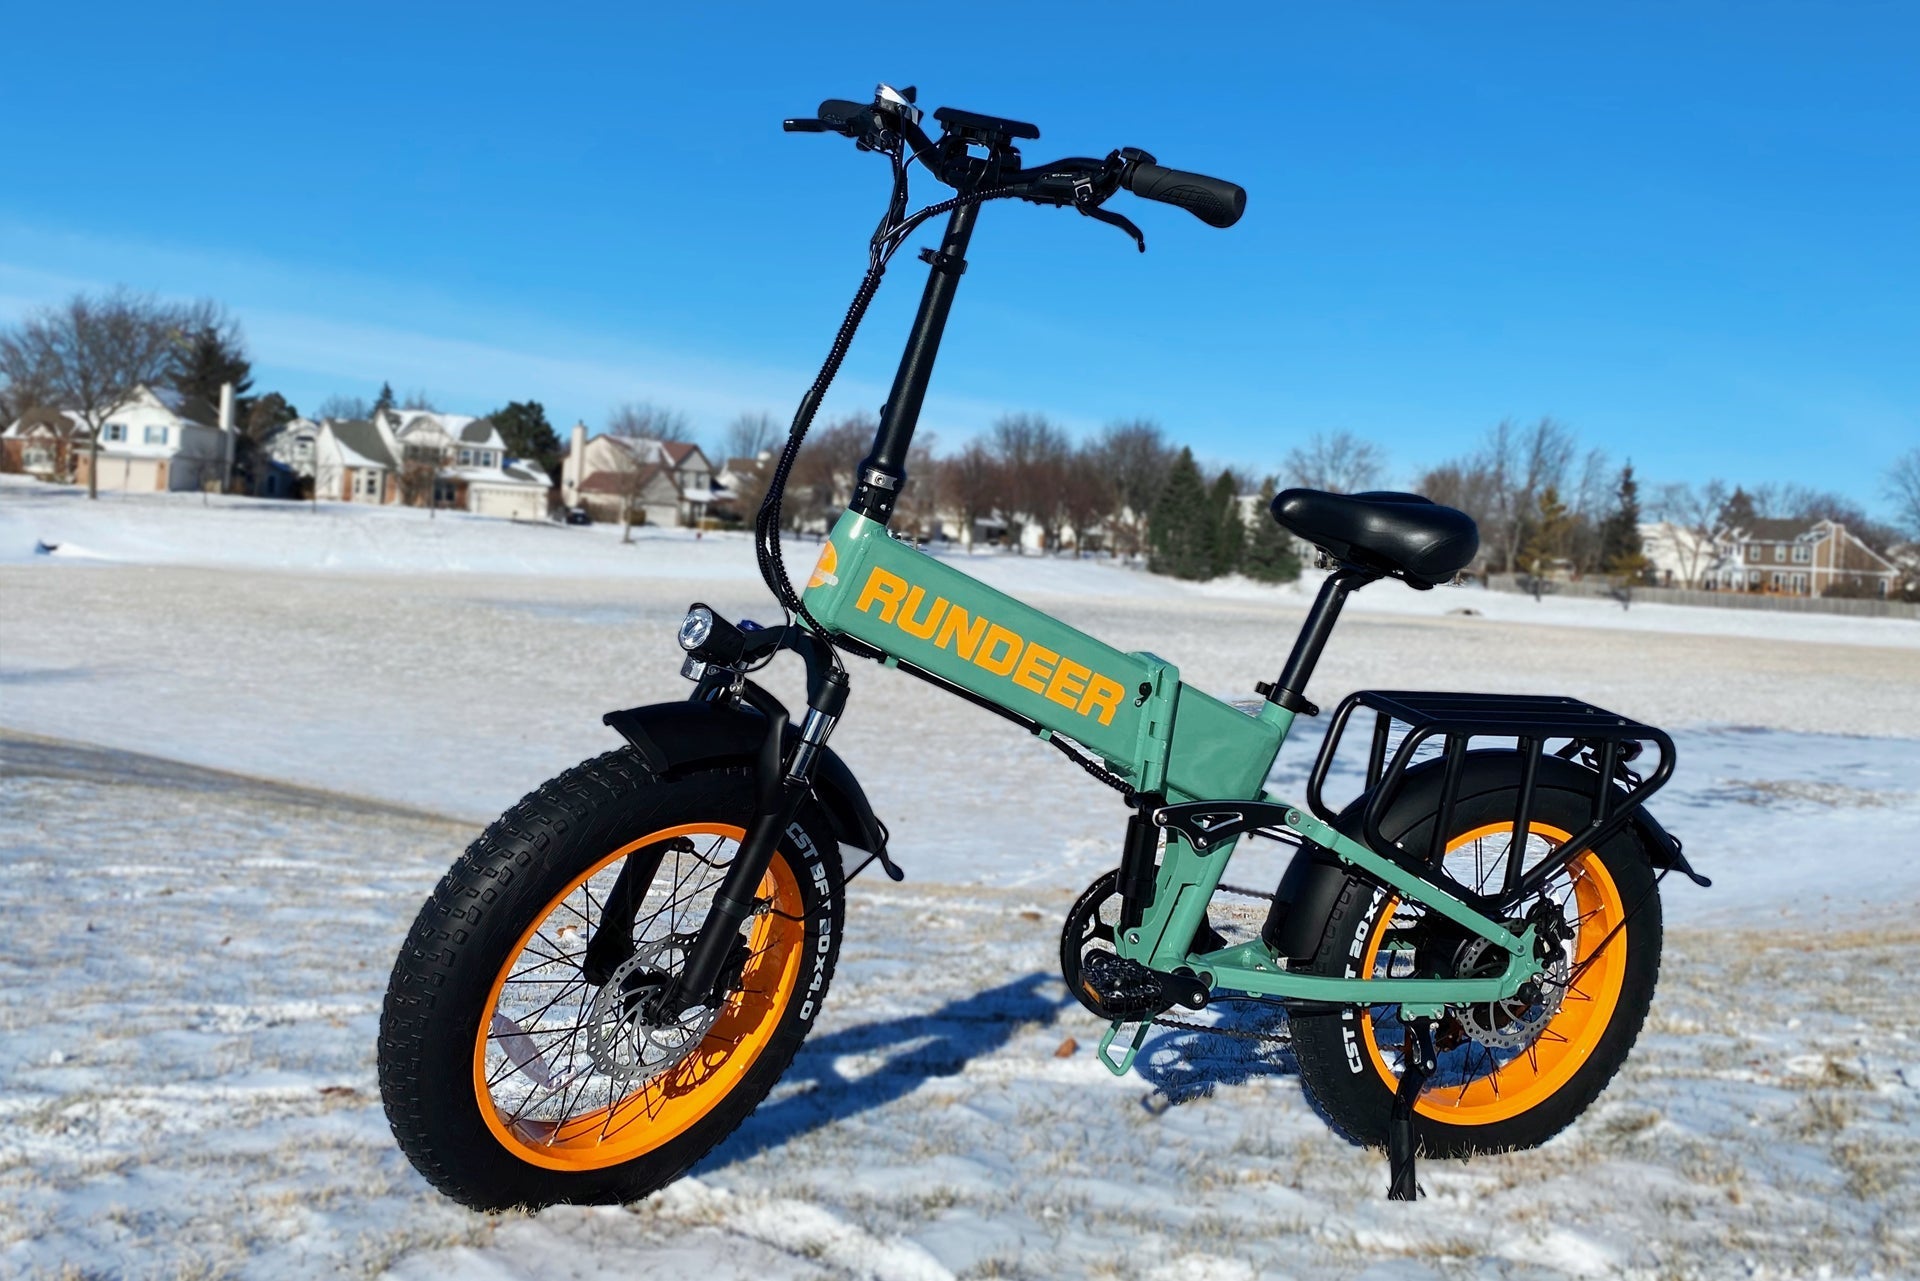 Buying-An-Electric-Bike-As-New-Year-Gift Rundeer